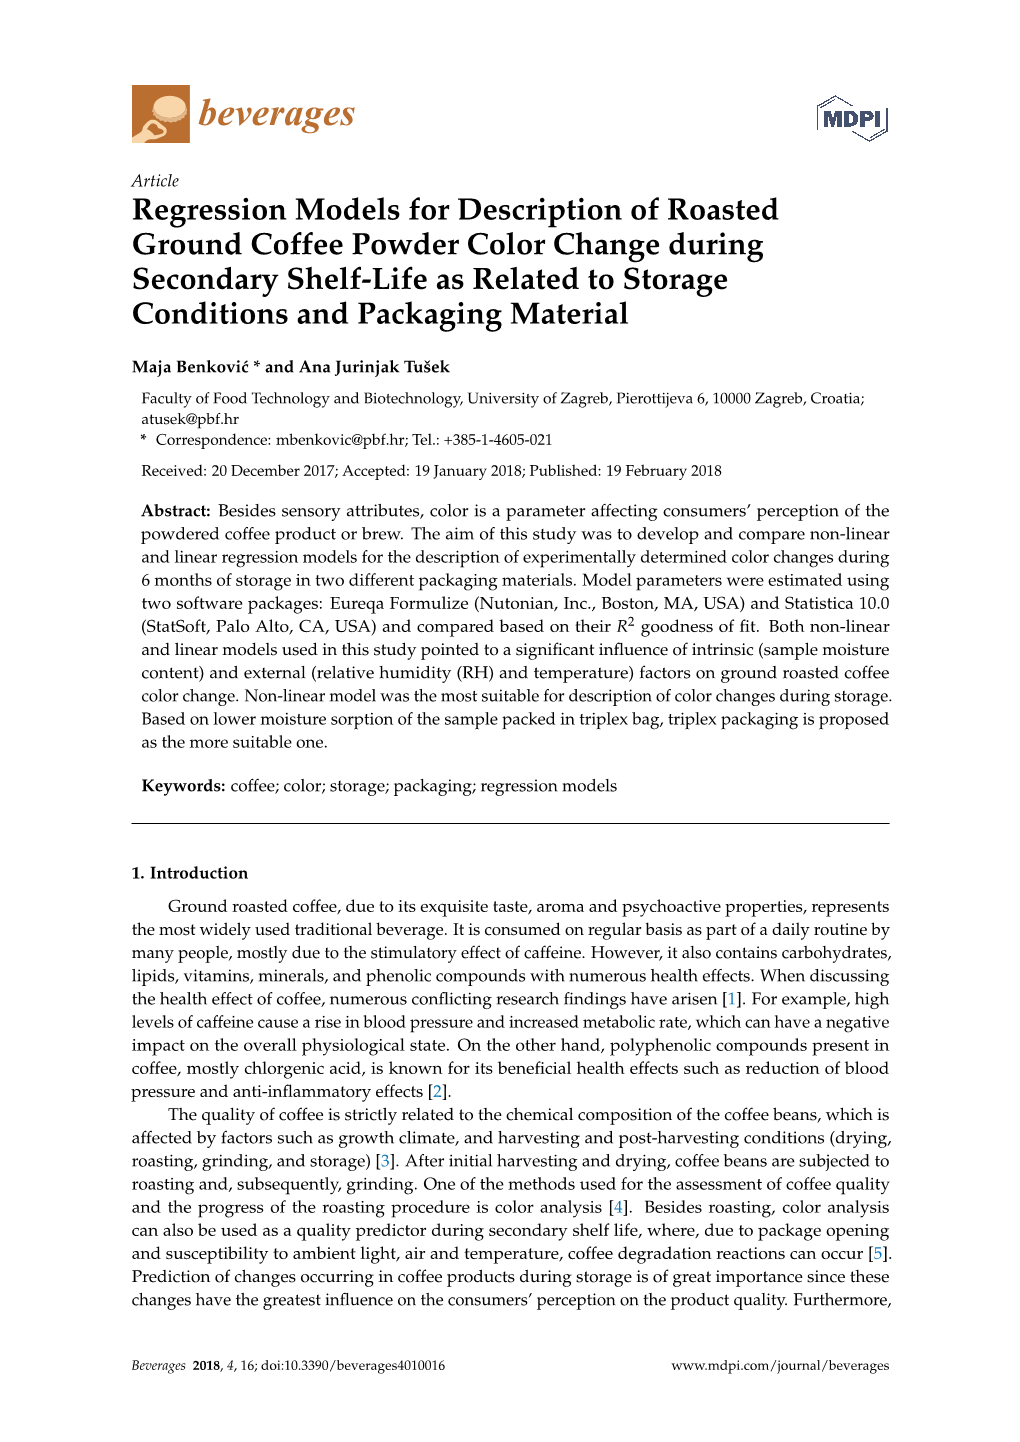 Regression Models for Description of Roasted Ground Coffee Powder Color Change During Secondary Shelf-Life As Related to Storage Conditions and Packaging Material